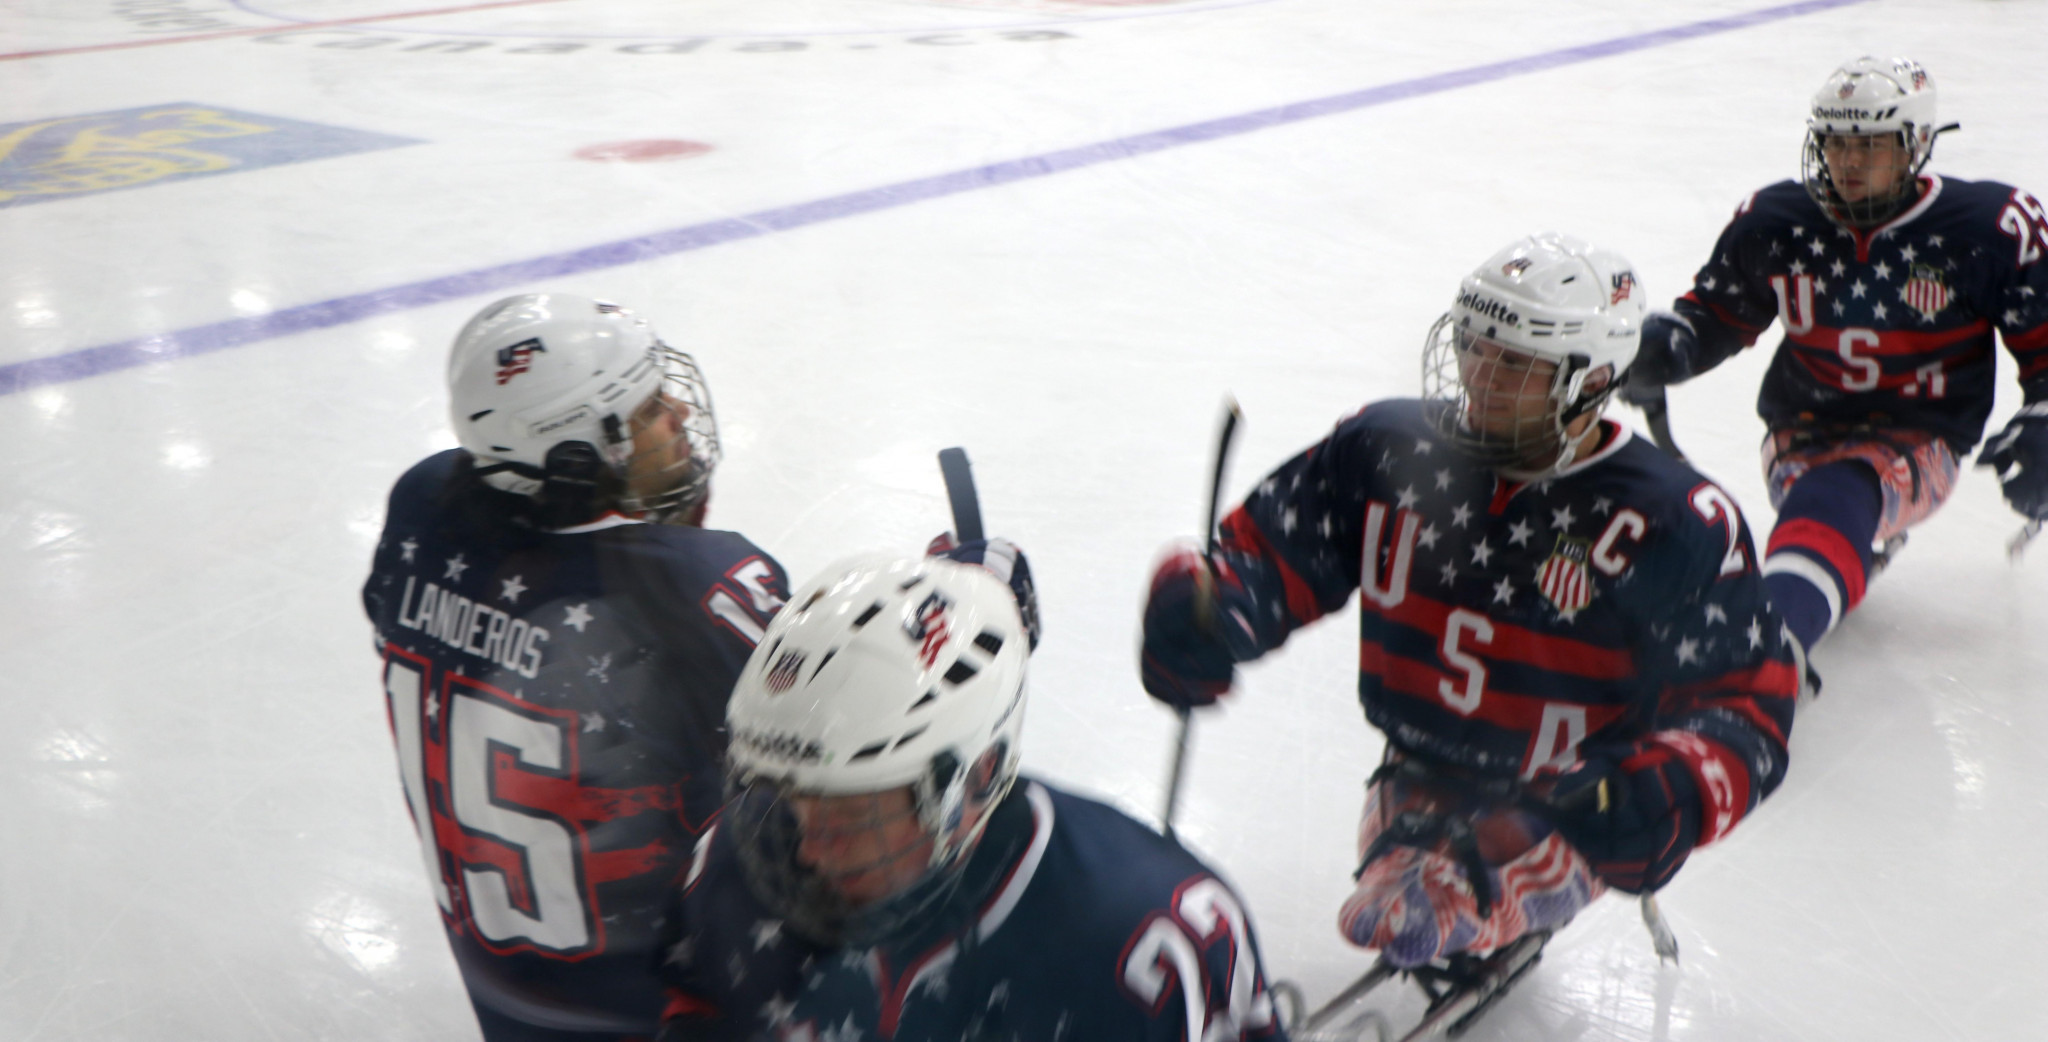 Defending champions and Paralympic gold medallists the United States continued their dominant start to the World Sledge Hockey Challenge ©USA Hockey